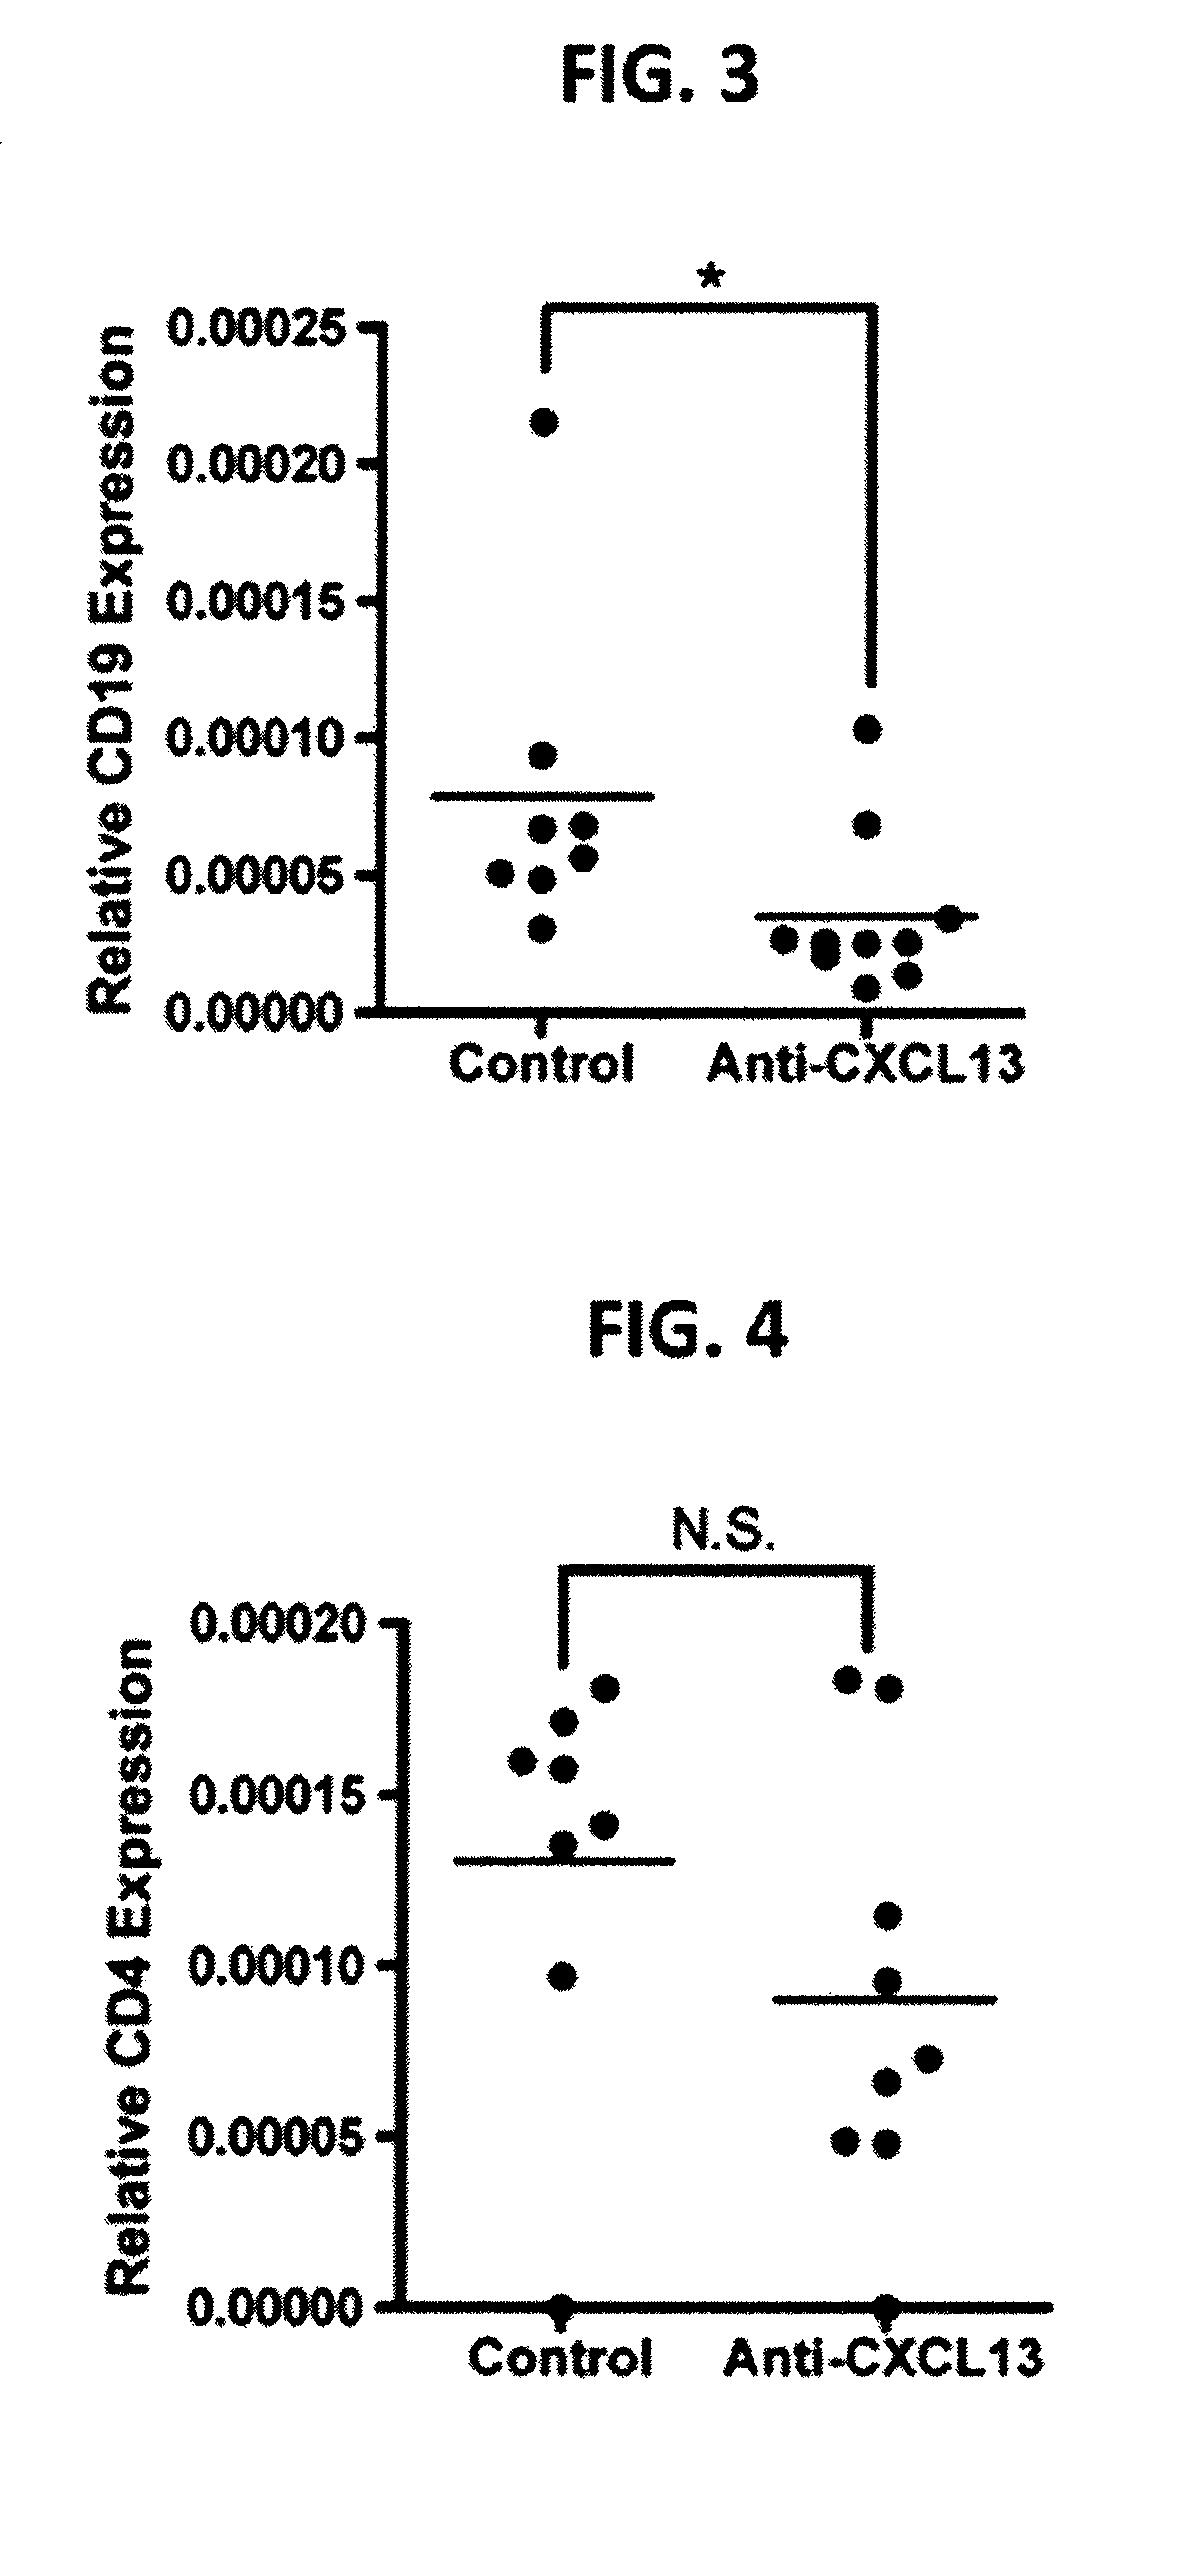 Methods for the treatment of B cell-mediated inflammatory diseases